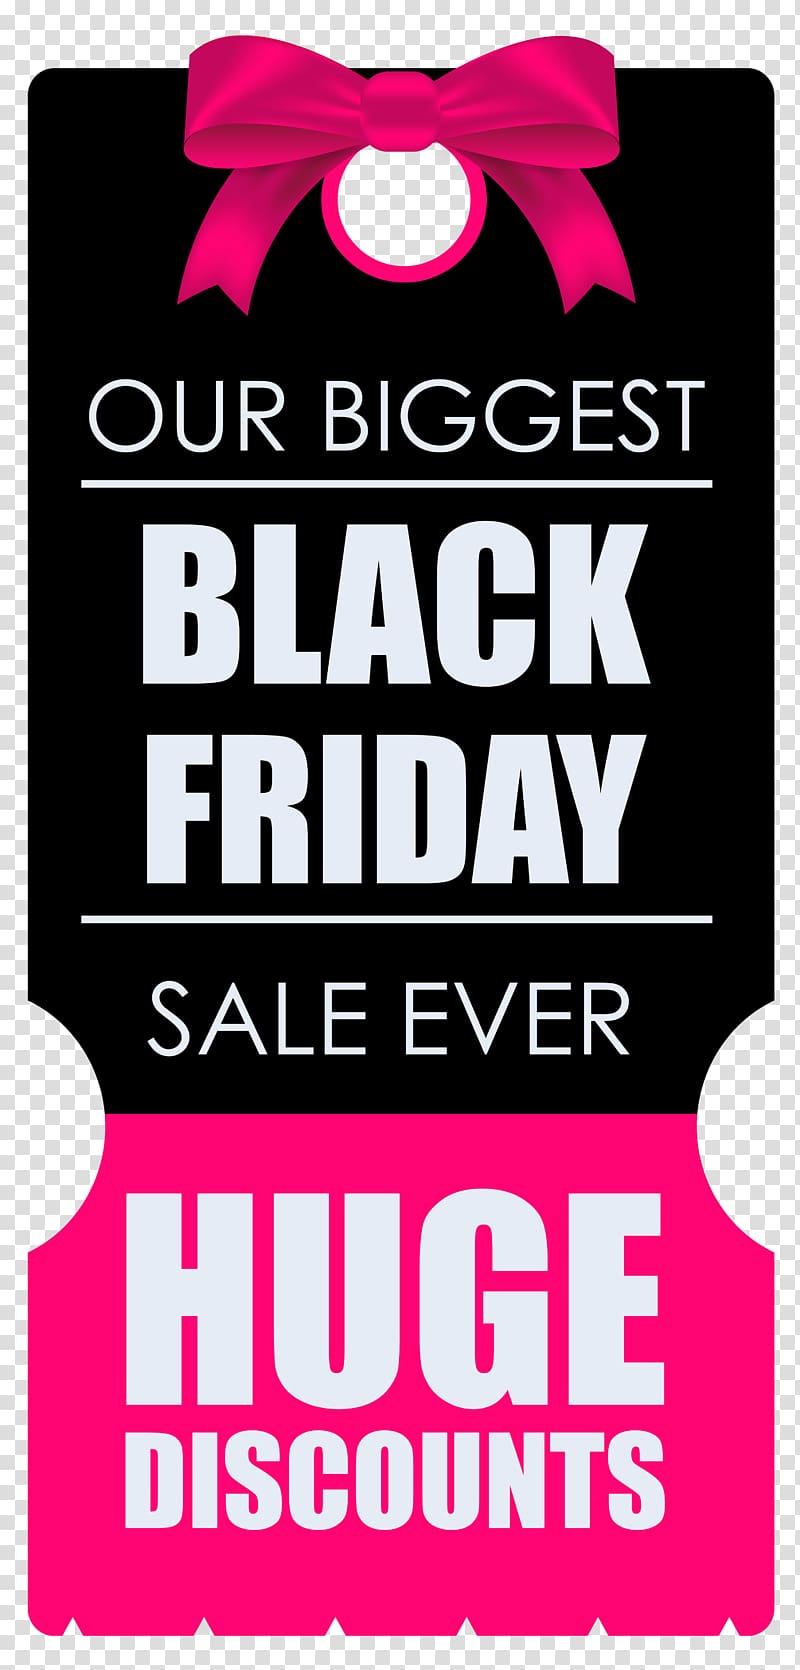 Camera Discounts and allowances, black friday transparent background PNG clipart